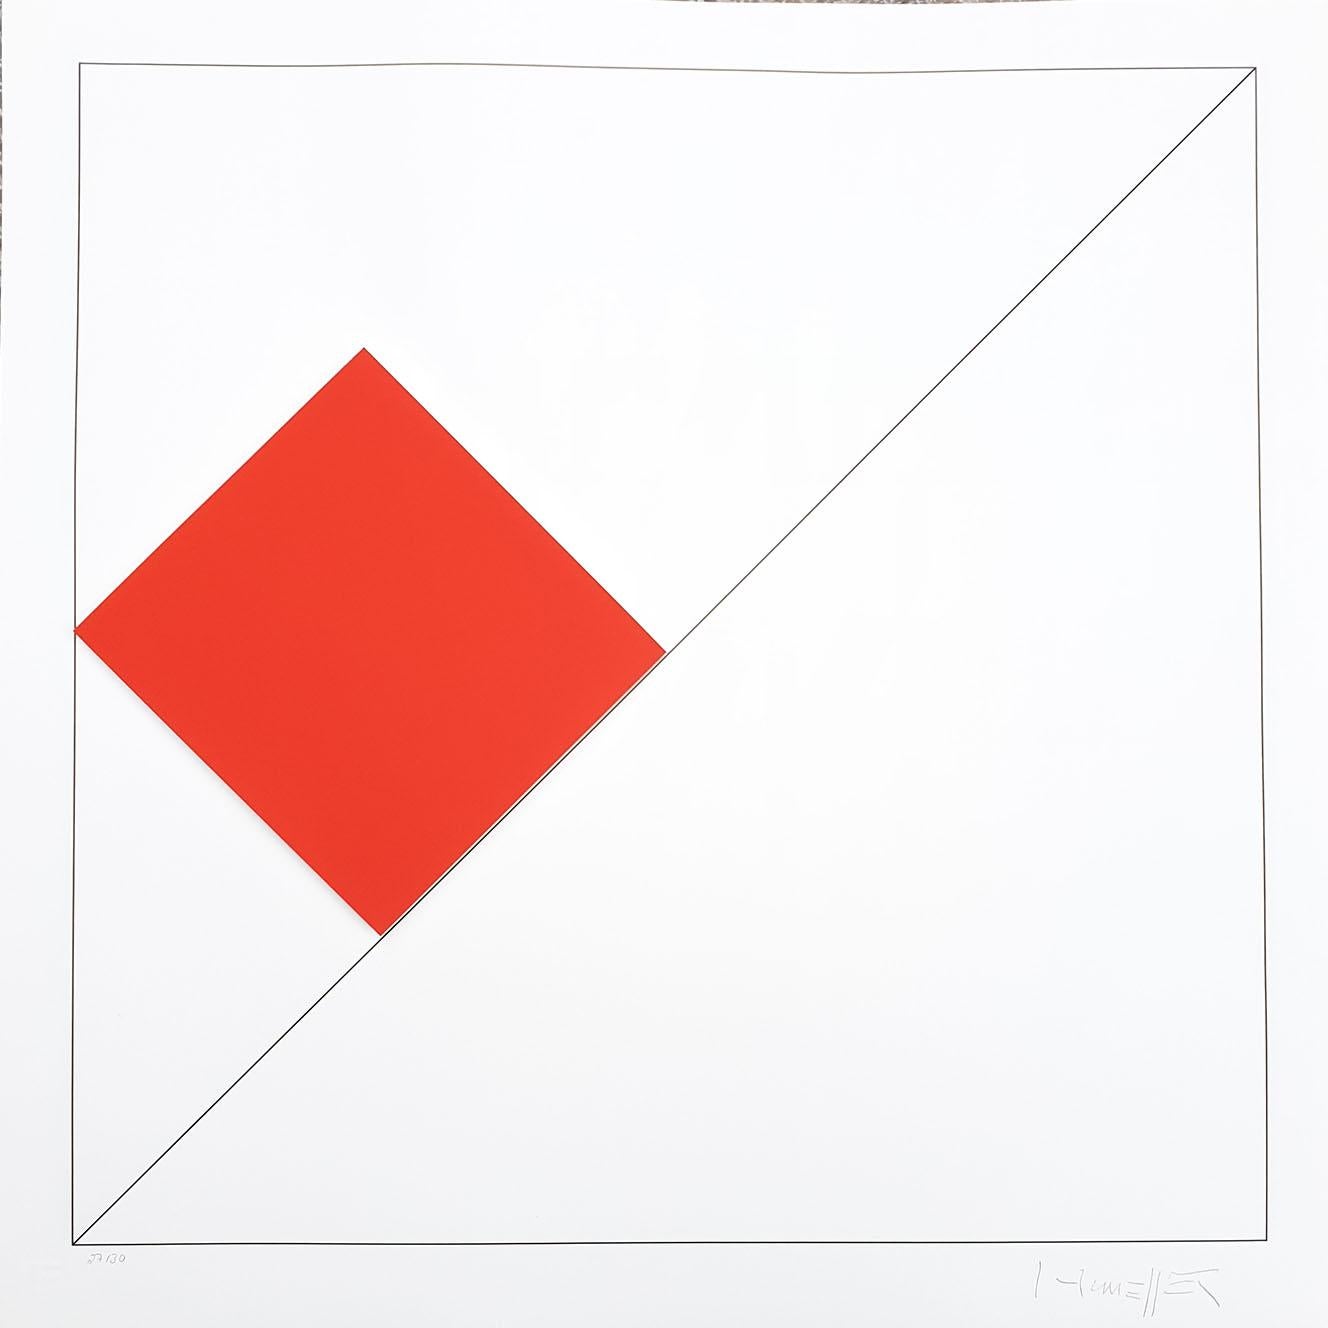 Gottfried Honegger
Composition 1 3D square (red) 
2015
Silkscreen print signed in pencil and numbered on 30 copies by the artist.
Dry stamp of the publisher in the margin at the lower left corner.
Condition: excellent; the work has never been